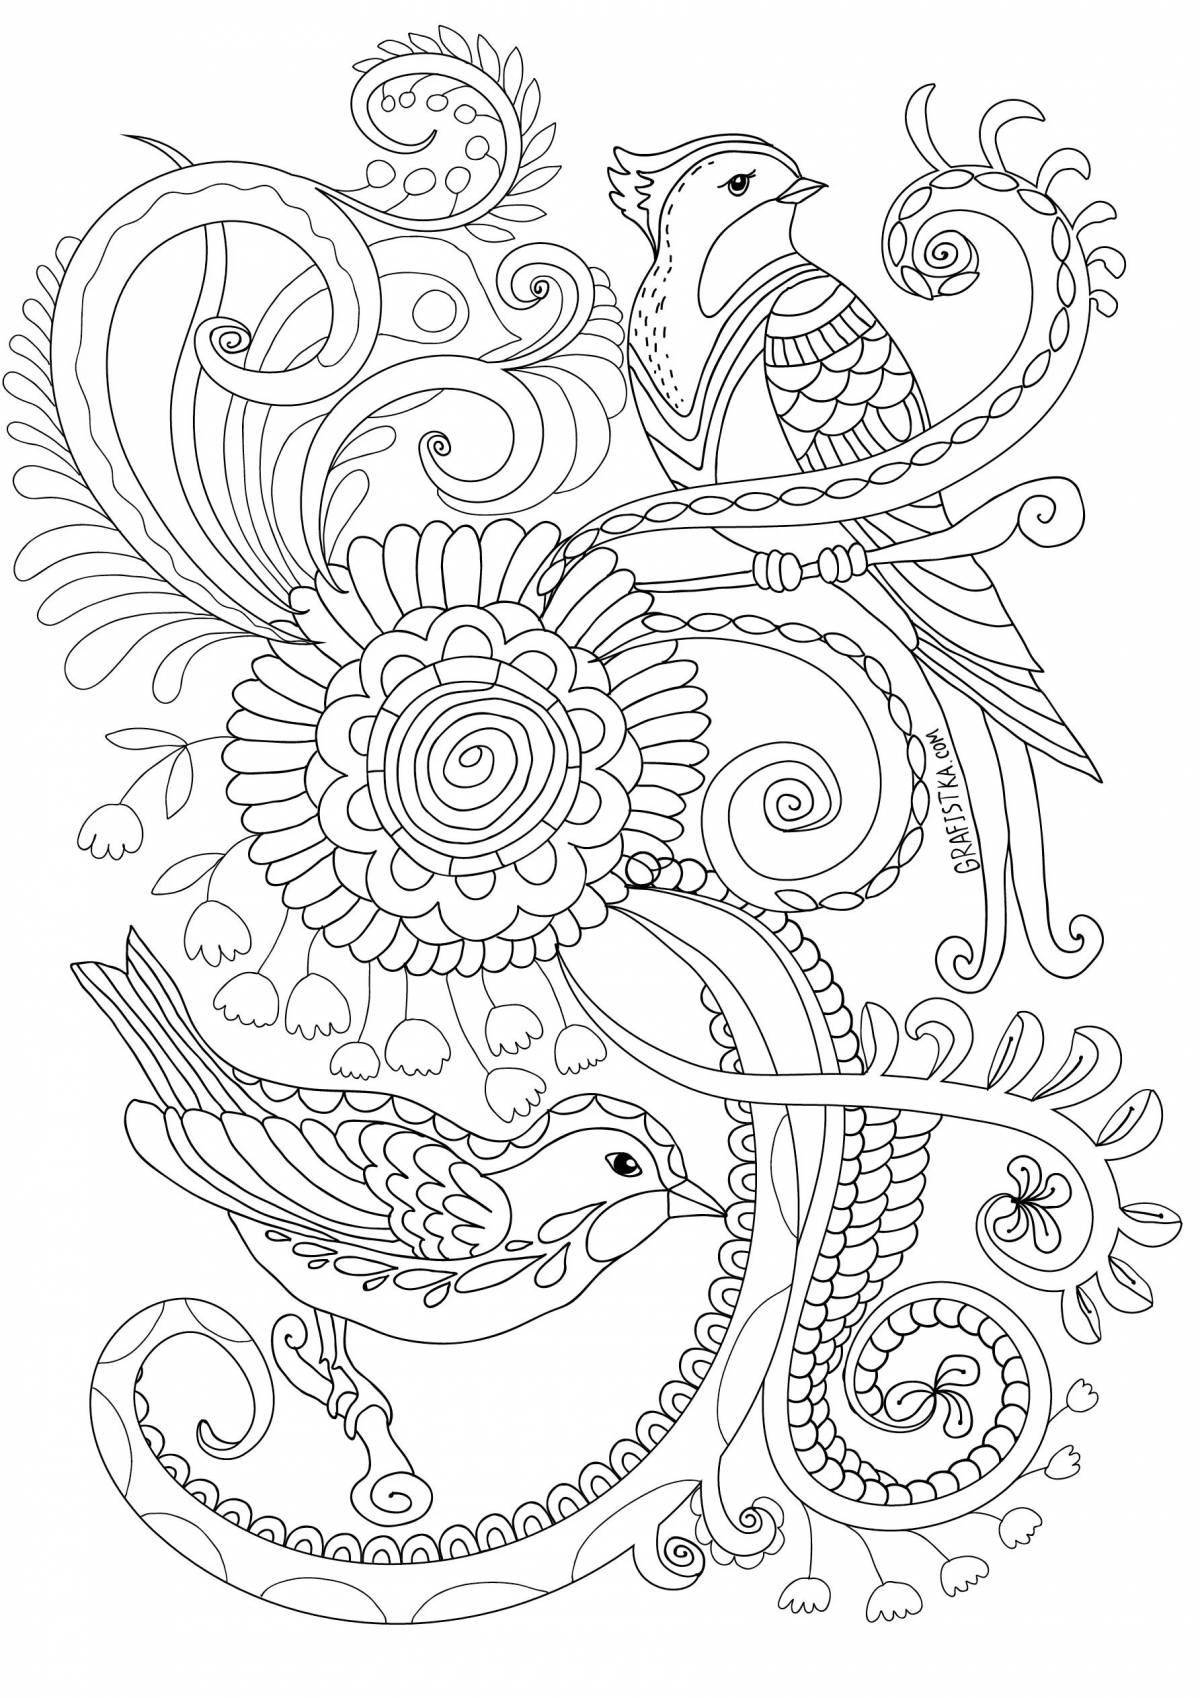 An entertaining anti-stress coloring book for children